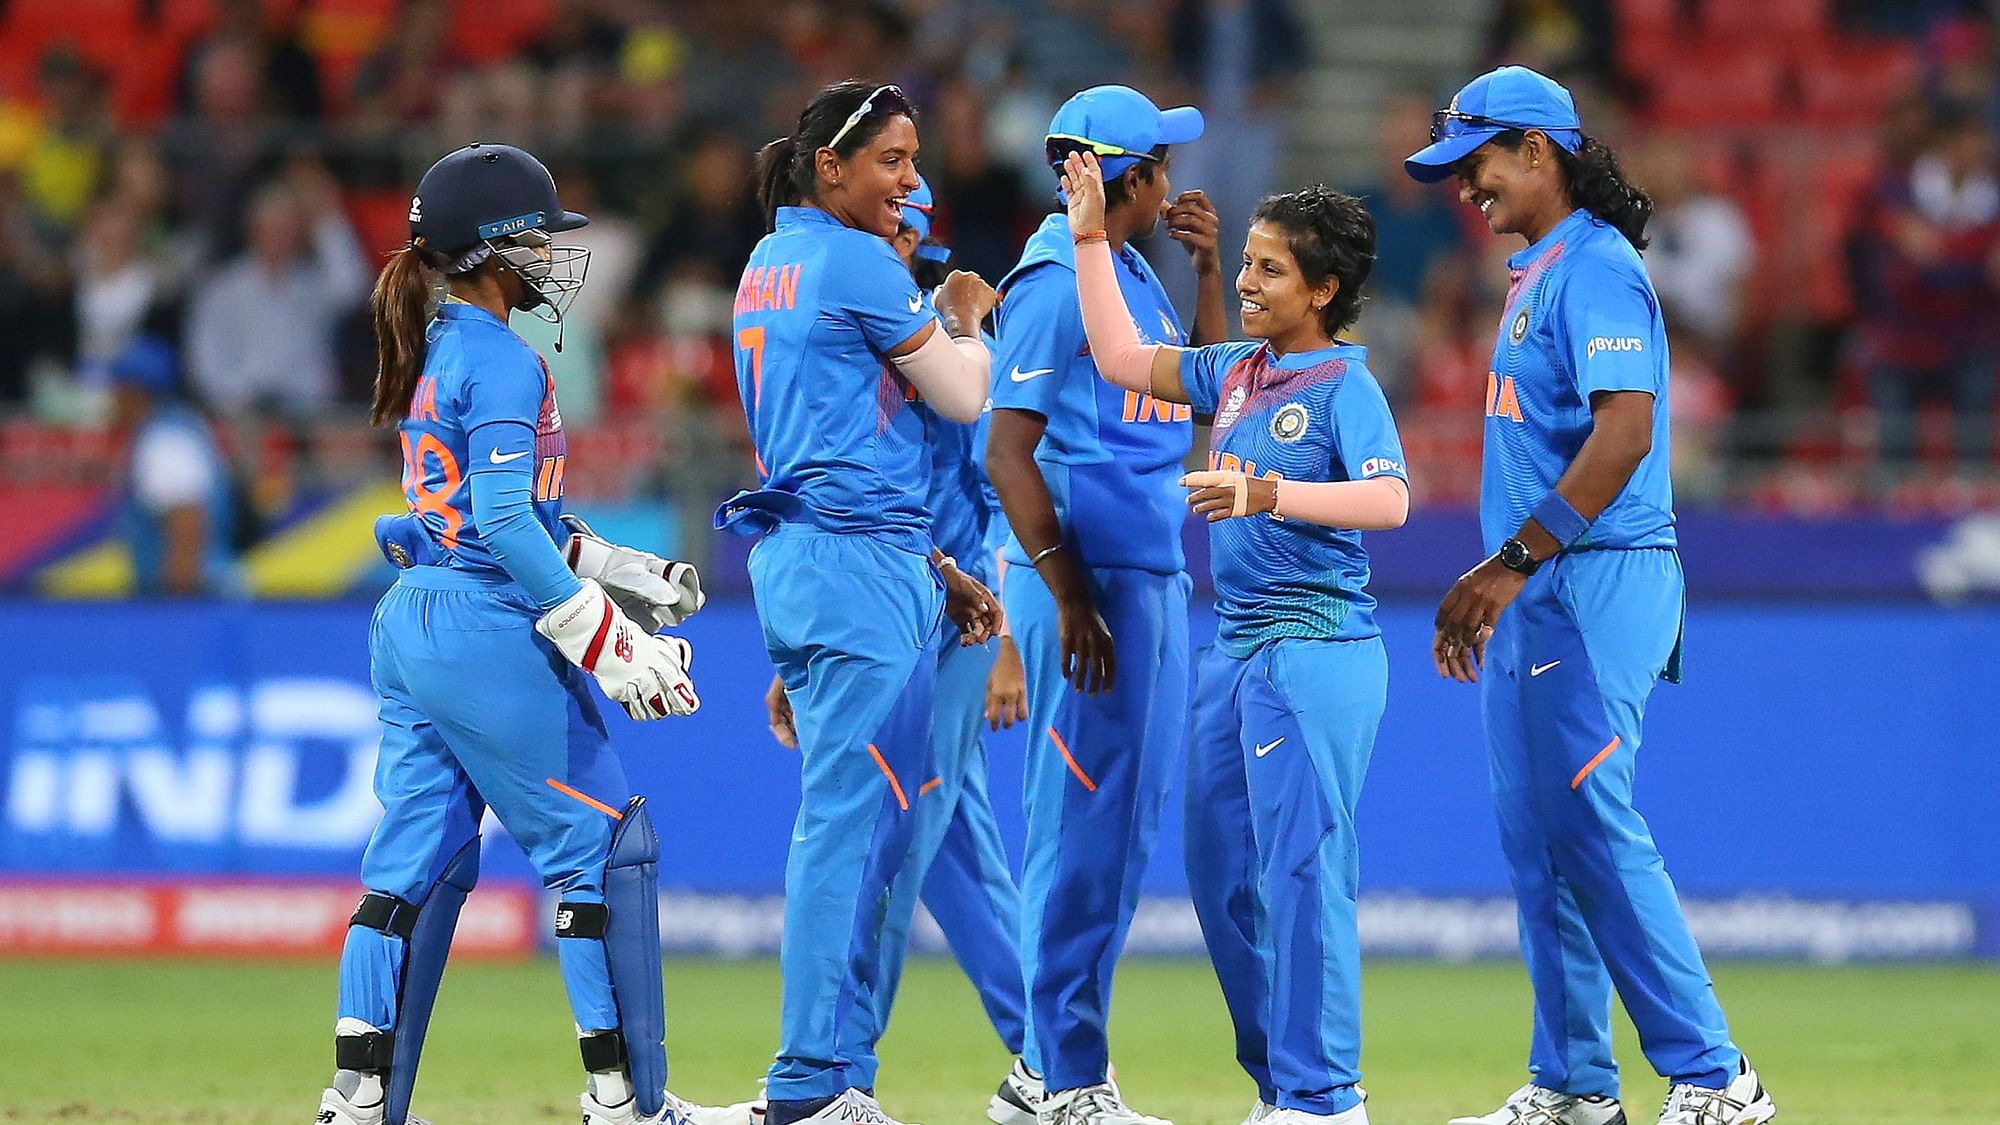 India vs Bangladesh (IND W vs BAN W) Womens T20 World Cup Live Streaming on DD Sports, Hotstar, Star Sports Hindi Online, Watch Womens T20 World Cup 2020 Live